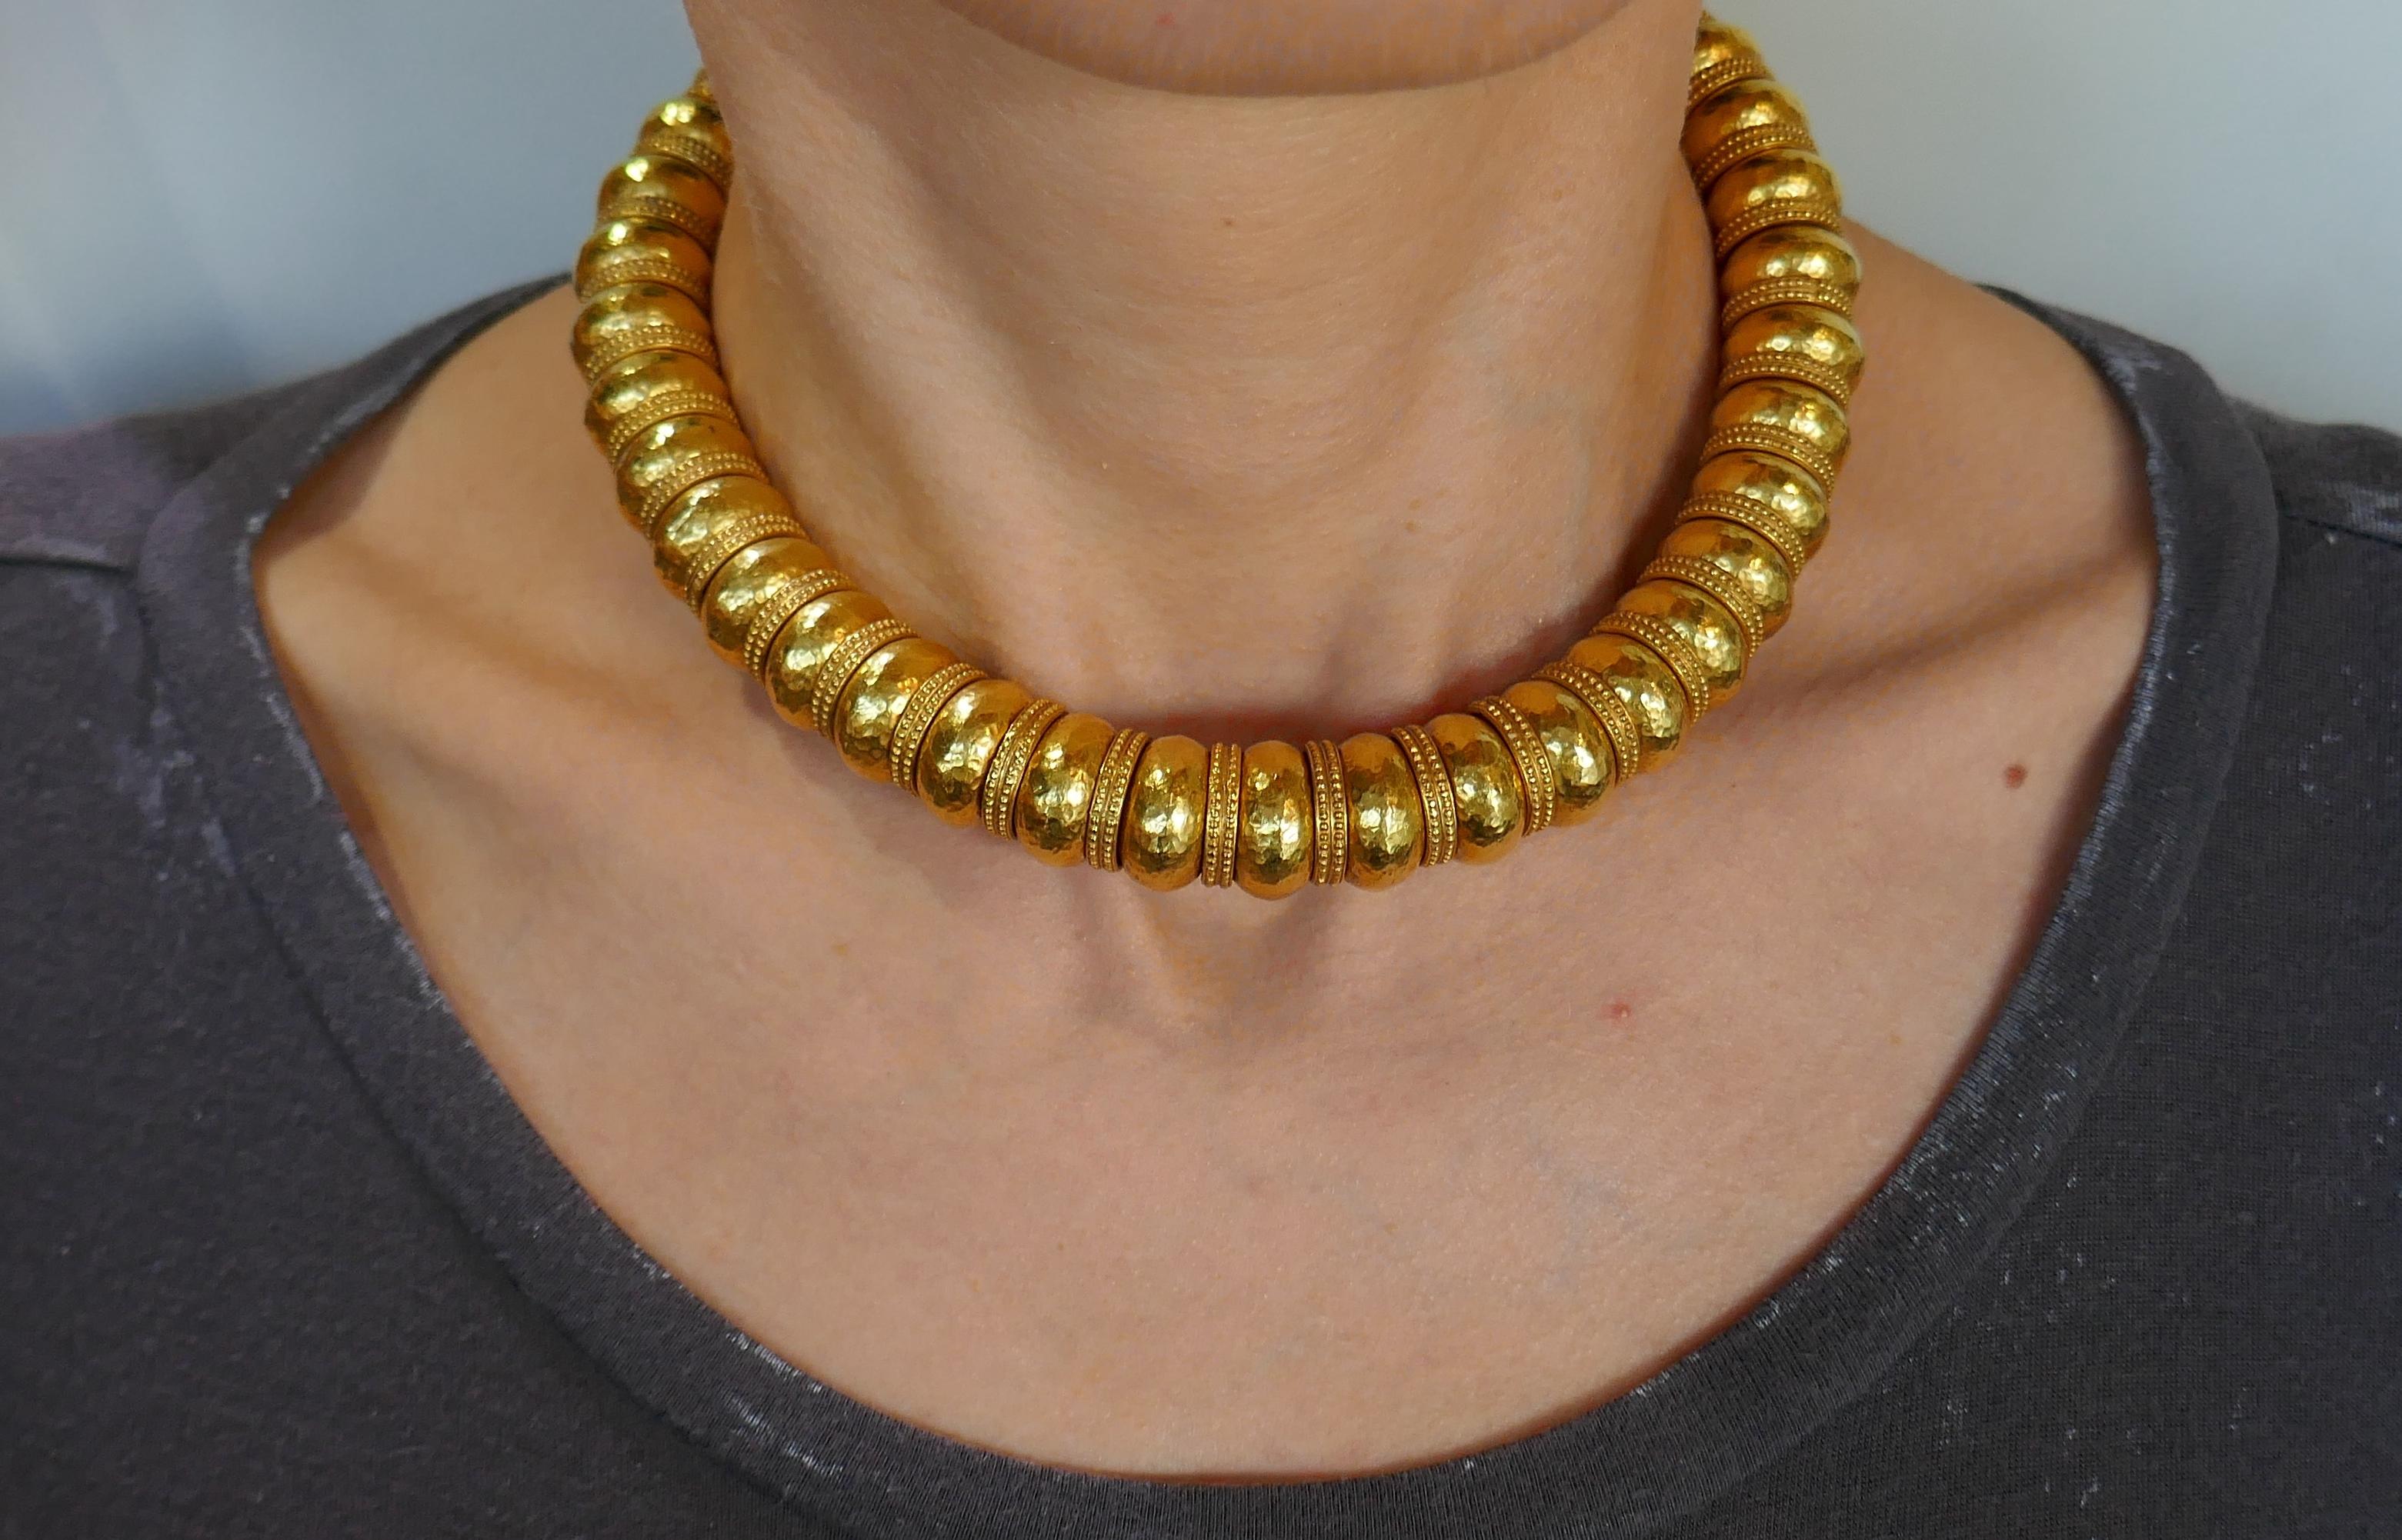 Fabulous necklace created by a Greek designer Ilias Lalaounis. Bold and wearable, the necklace is a great addition to your jewelry collection. 
Made of 22 karat (stamped) yellow gold. 
The necklace measures 15-1/8 x 5/8 inches (38 x 1.4 cm) and